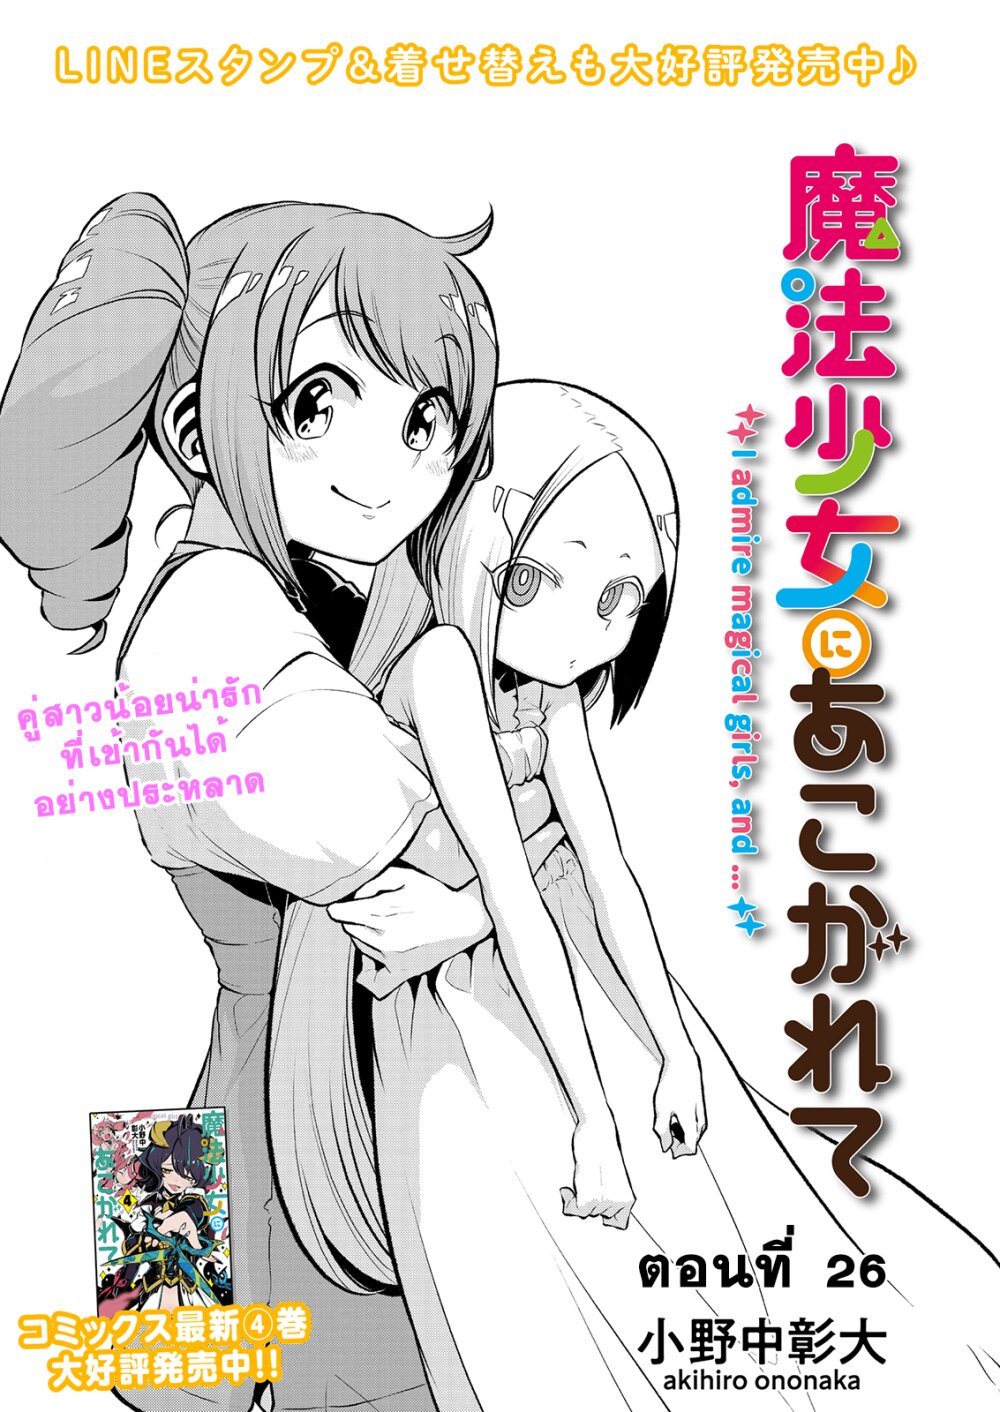 Looking up to Magical Girls 26 (3)